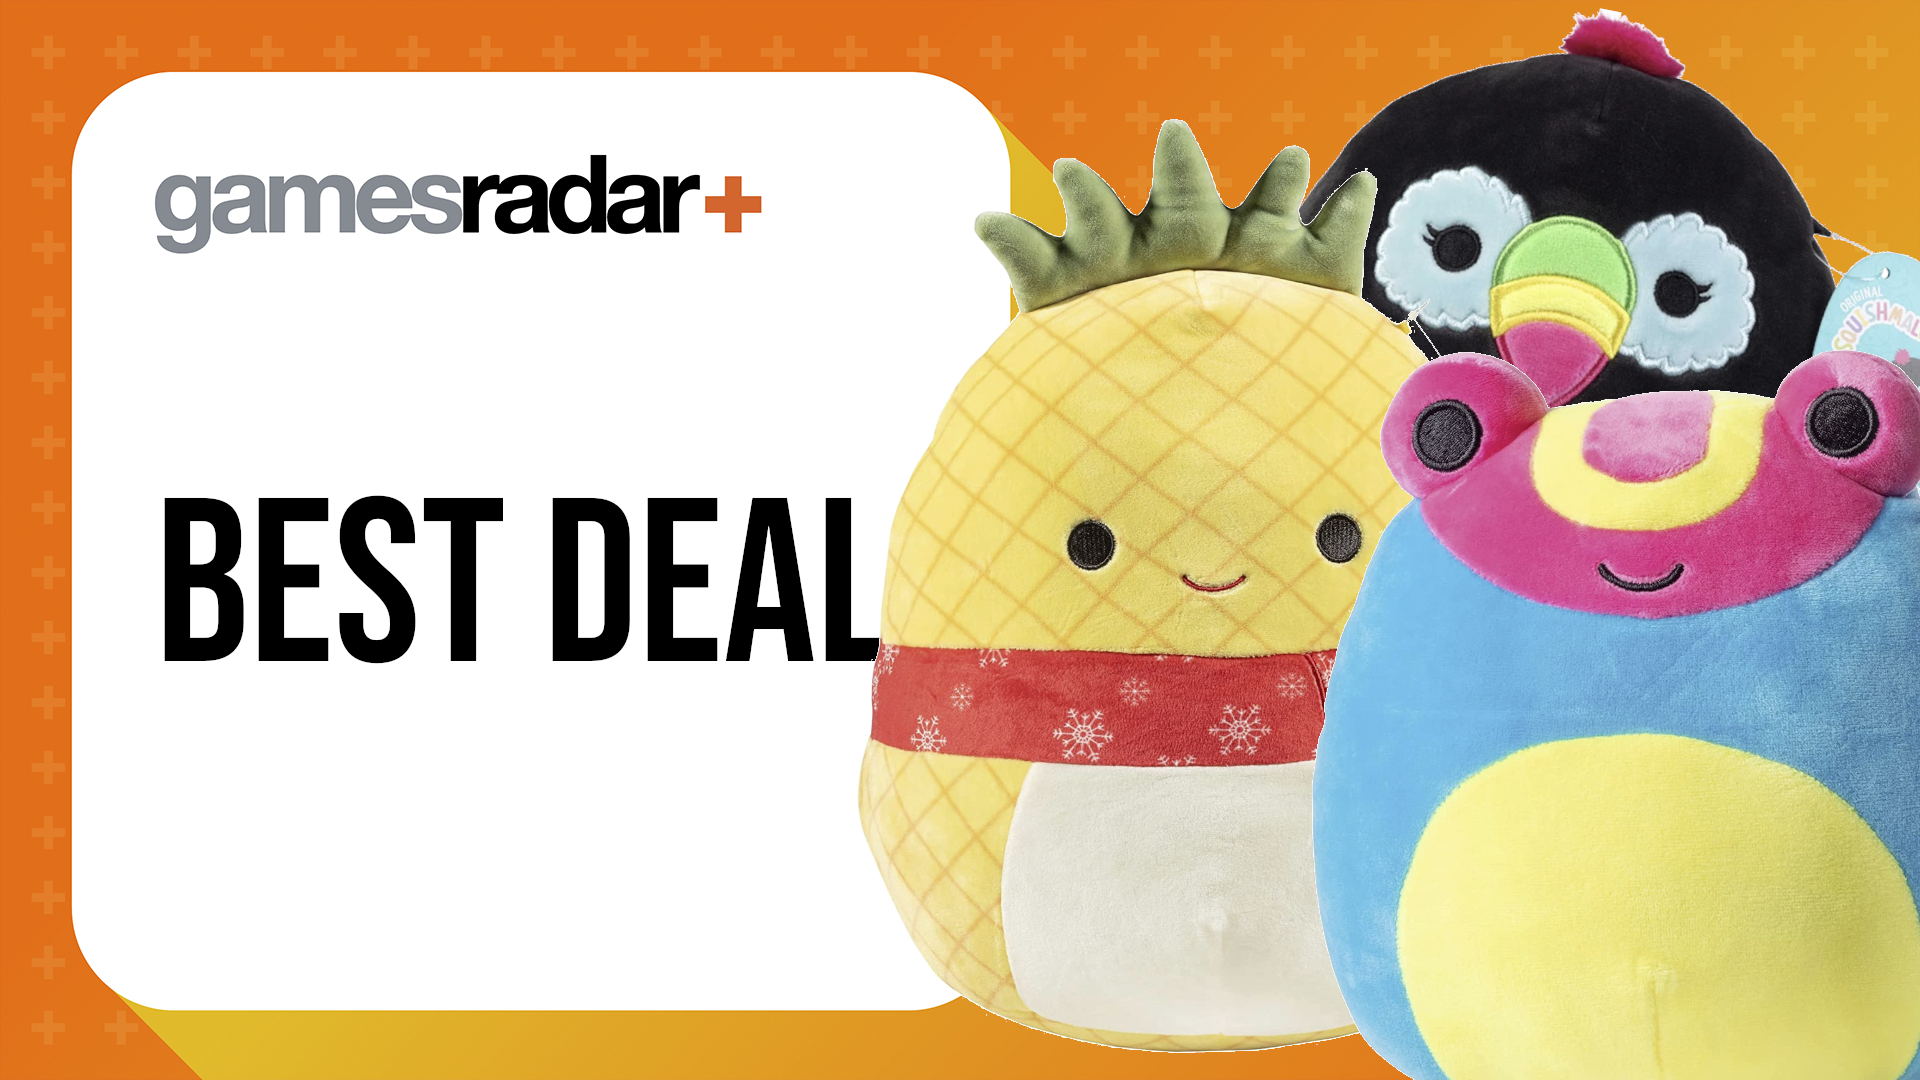 Cyber Monday toy deals with Squishmallows